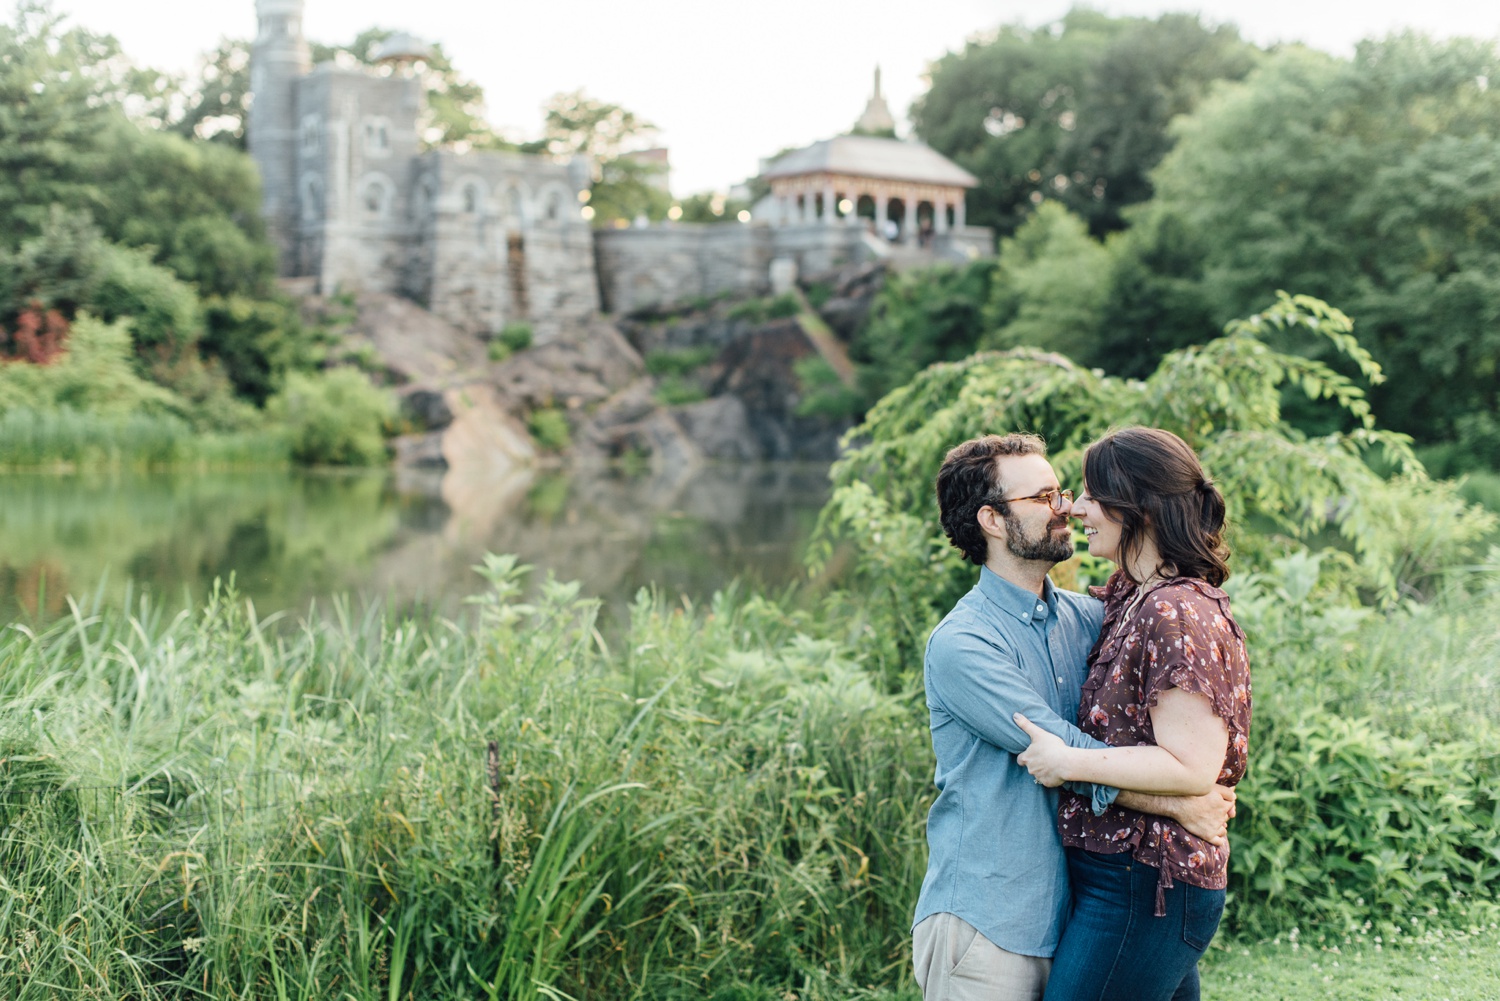 Mollie + Andrew - Delacorte Theater - Central Park Engagement Session - Alison Dunn Photography photo